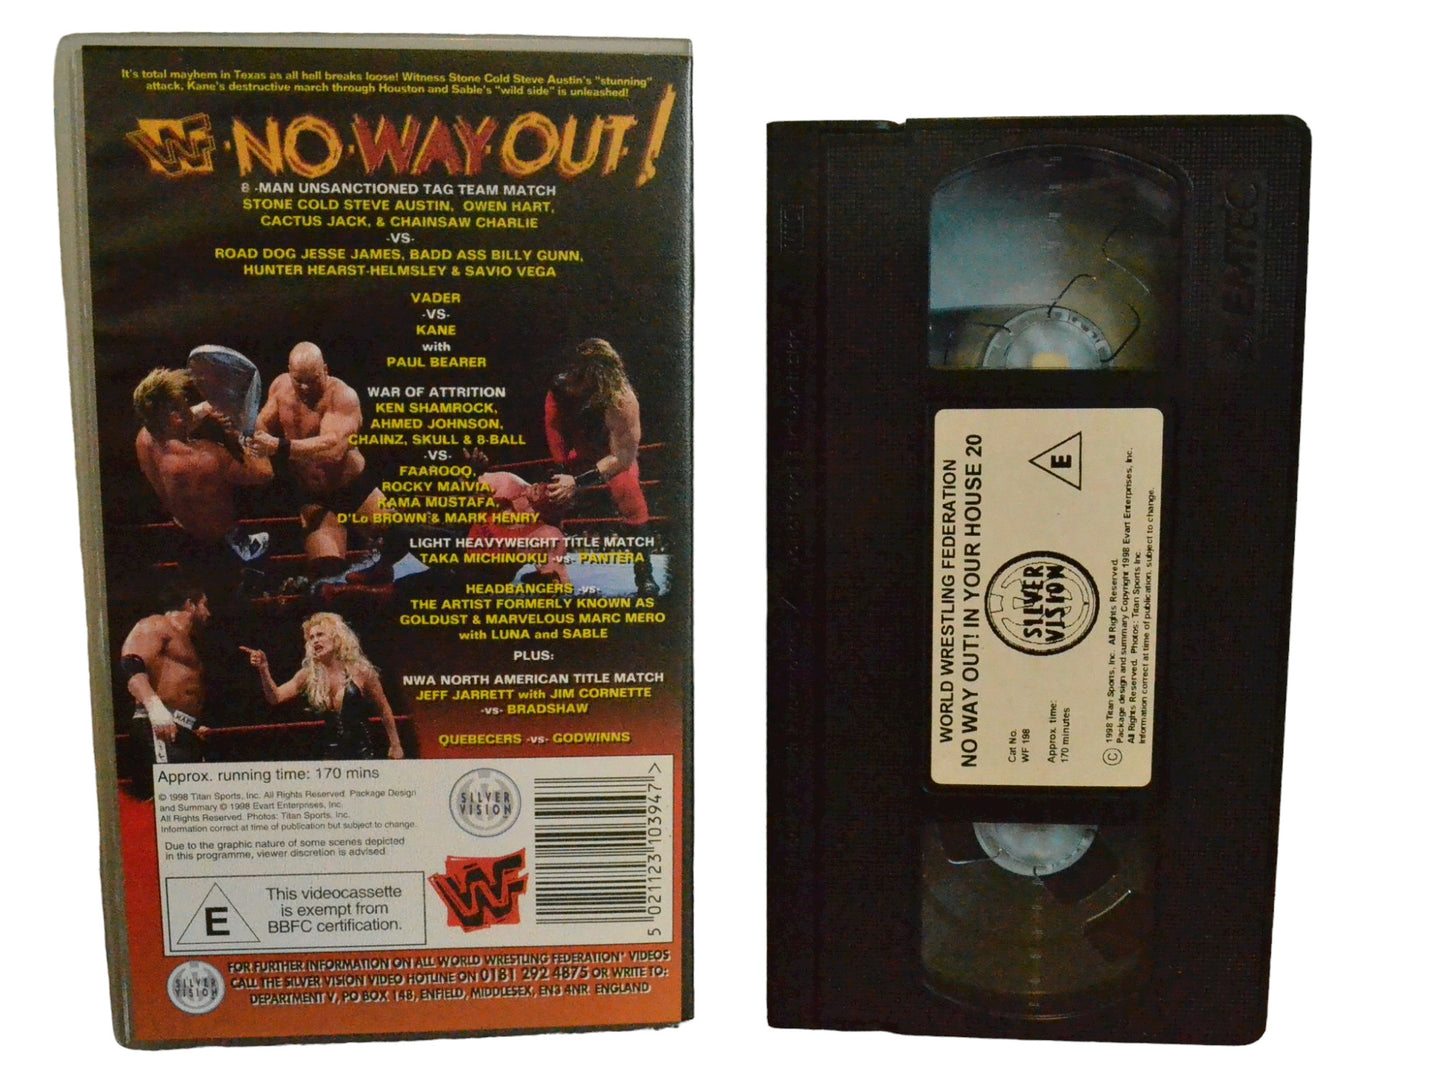 WWF: No Way Out! In Your House 20 - Steve Austin - World Wrestling Federation Home Video - Wrestling - PAL - VHS-